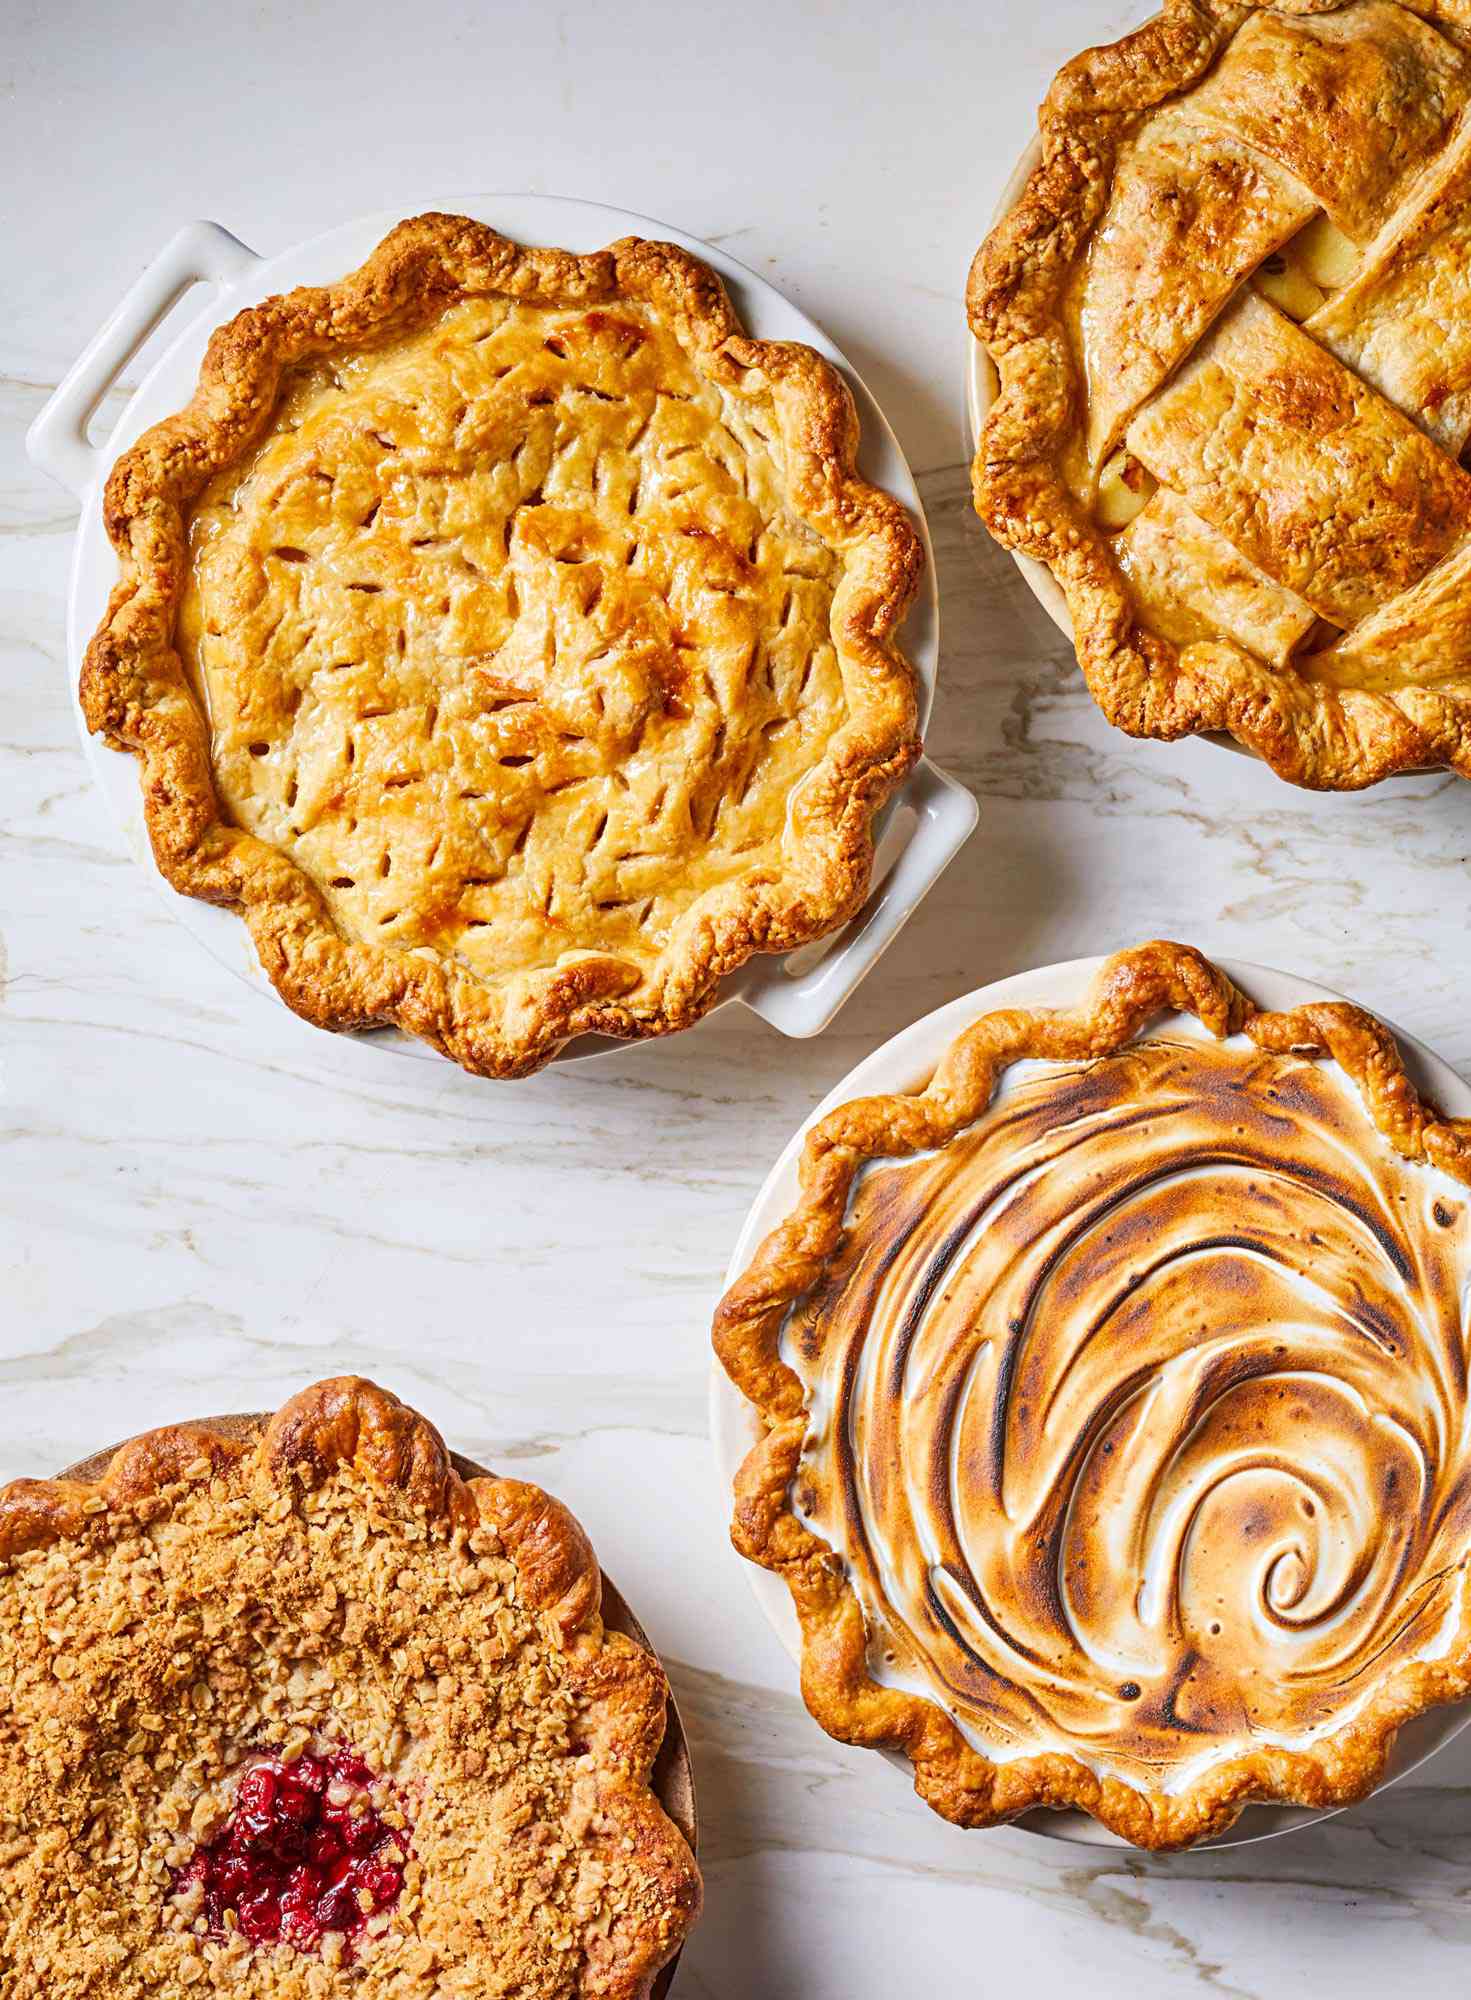 Classic holiday pies, reimagined